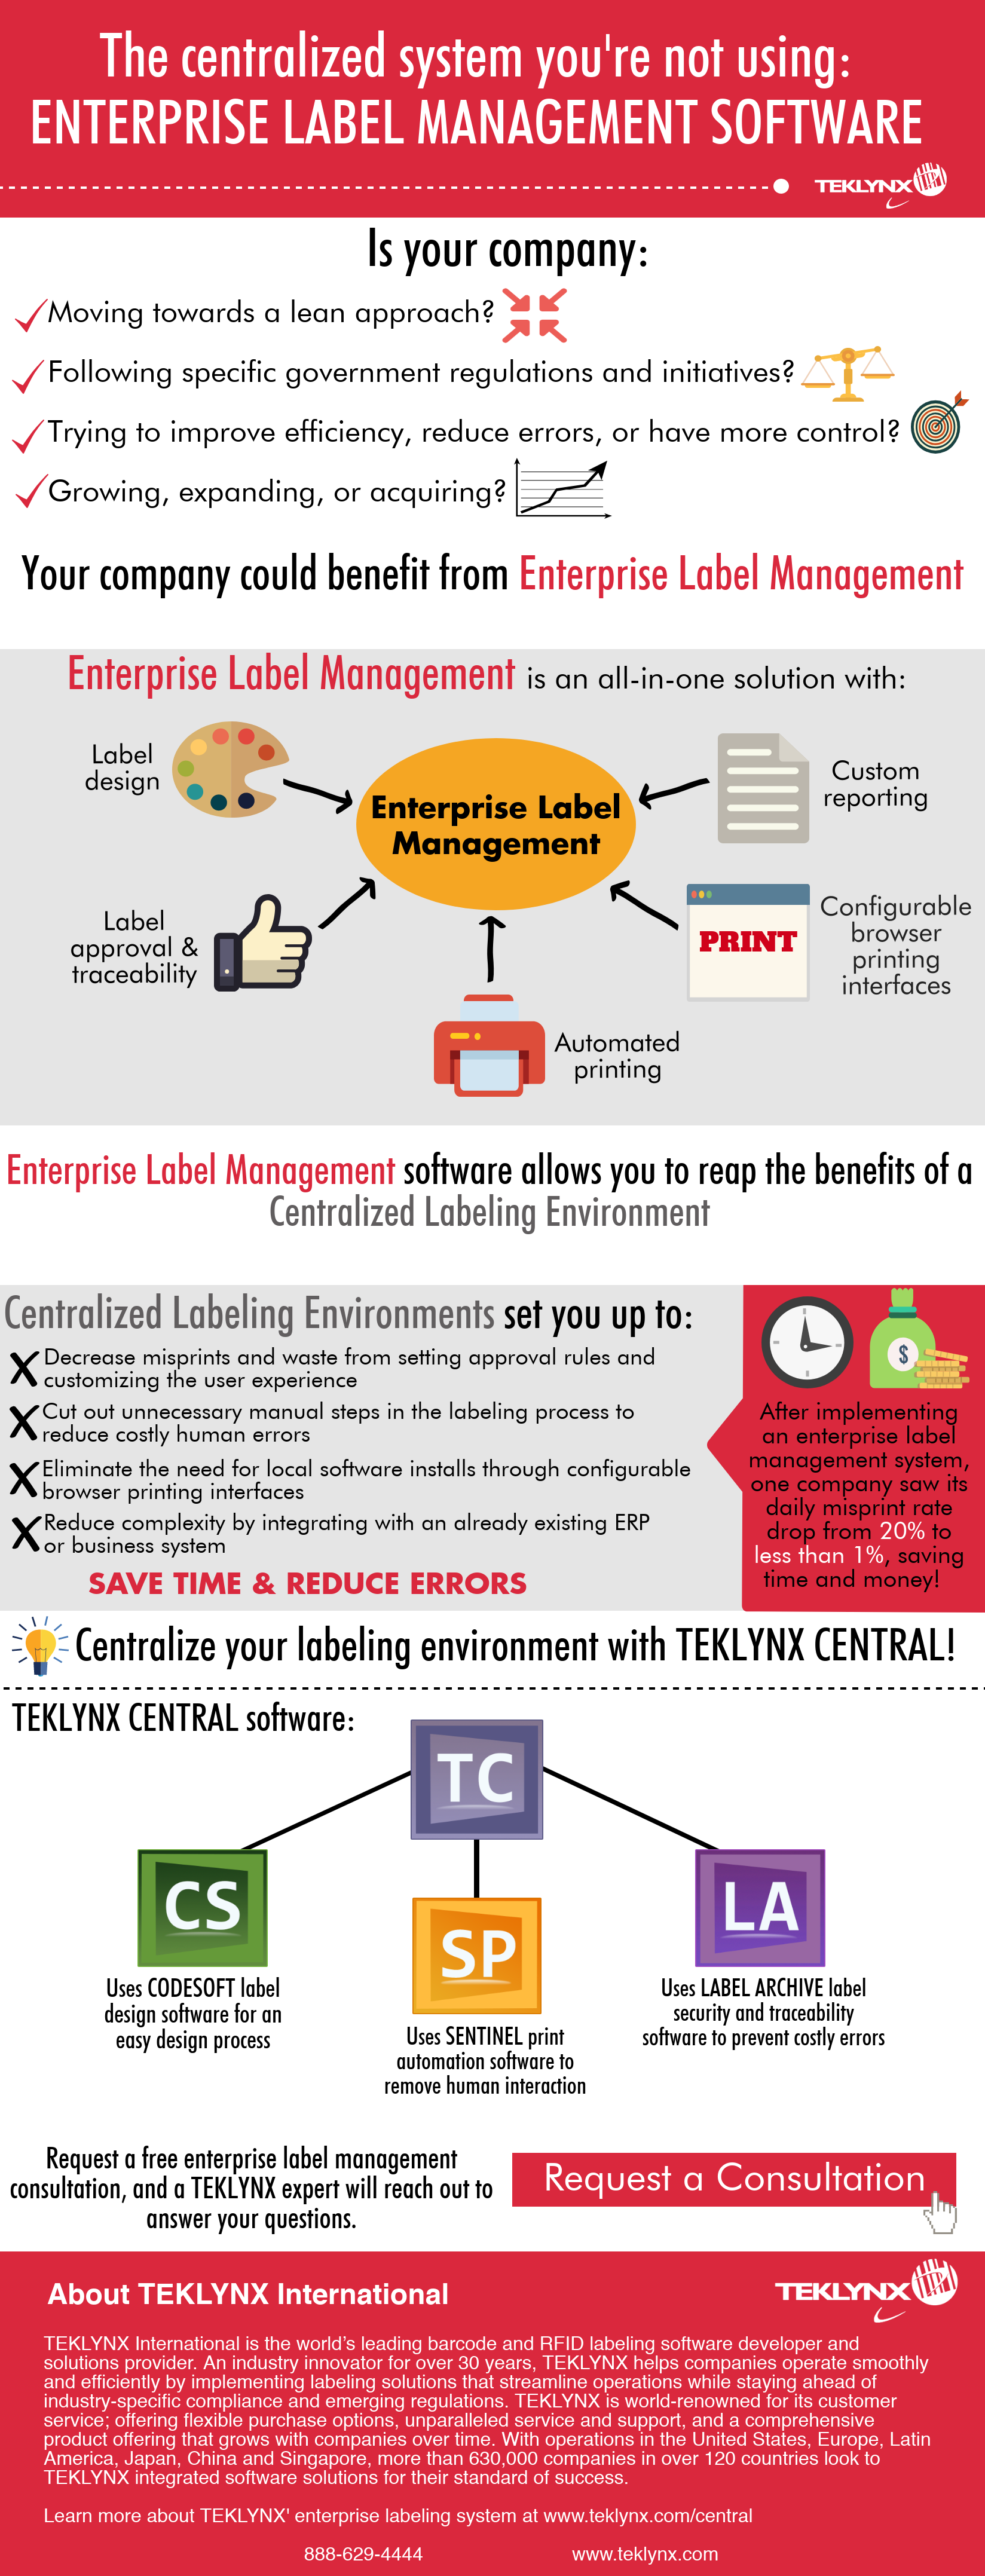 The centralized system you're not using: Enterprise Label Management Software